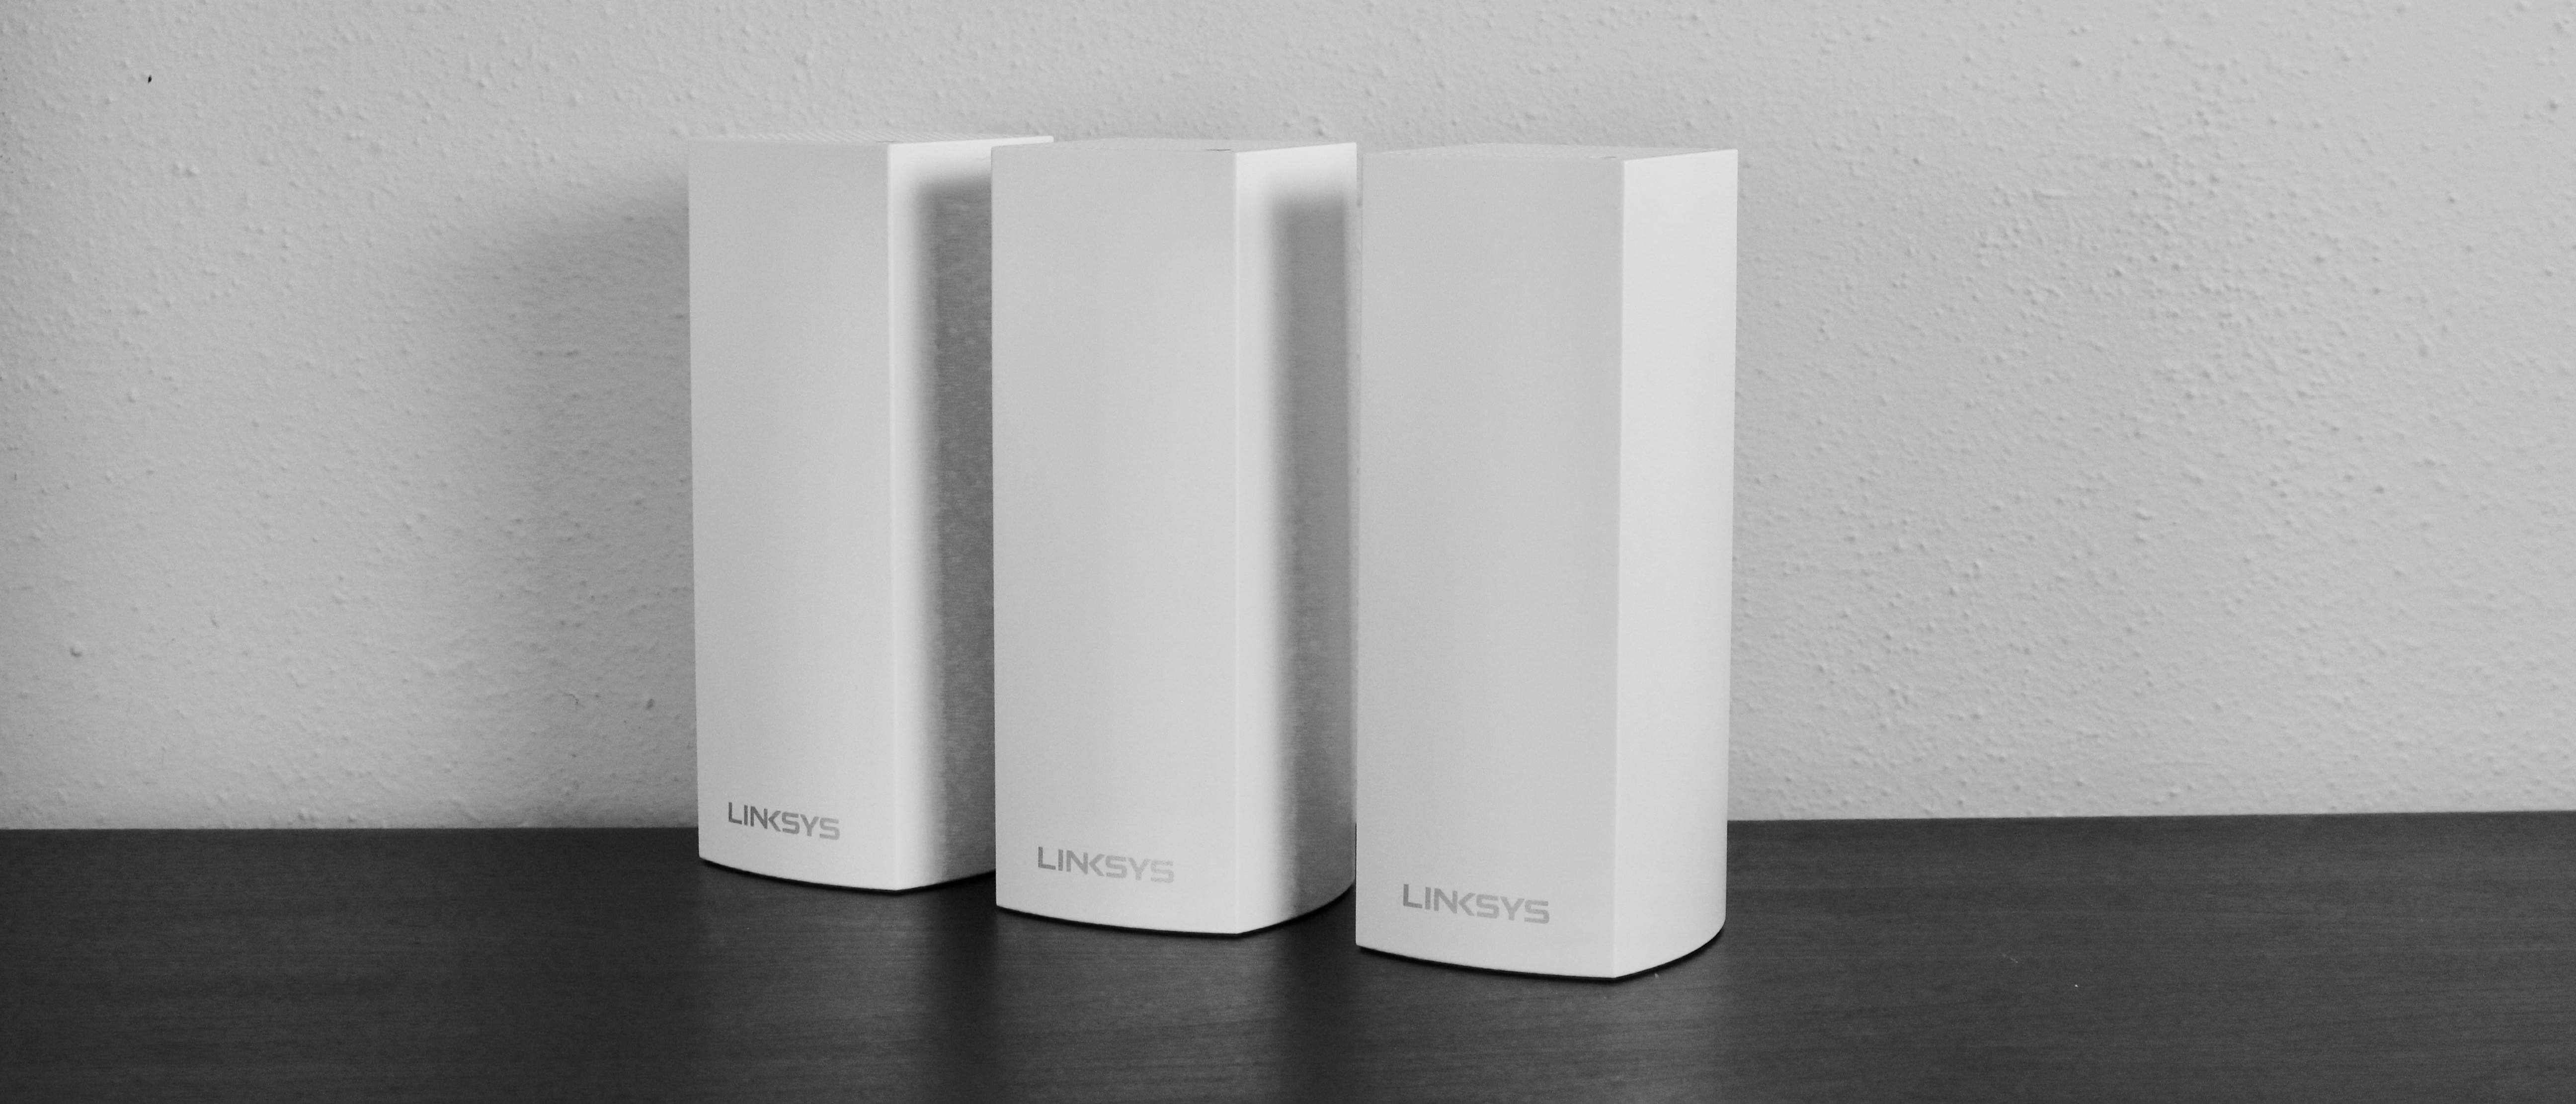 The Linksys Velop is easy to configure and delivers great wireless speeds over a wide area.